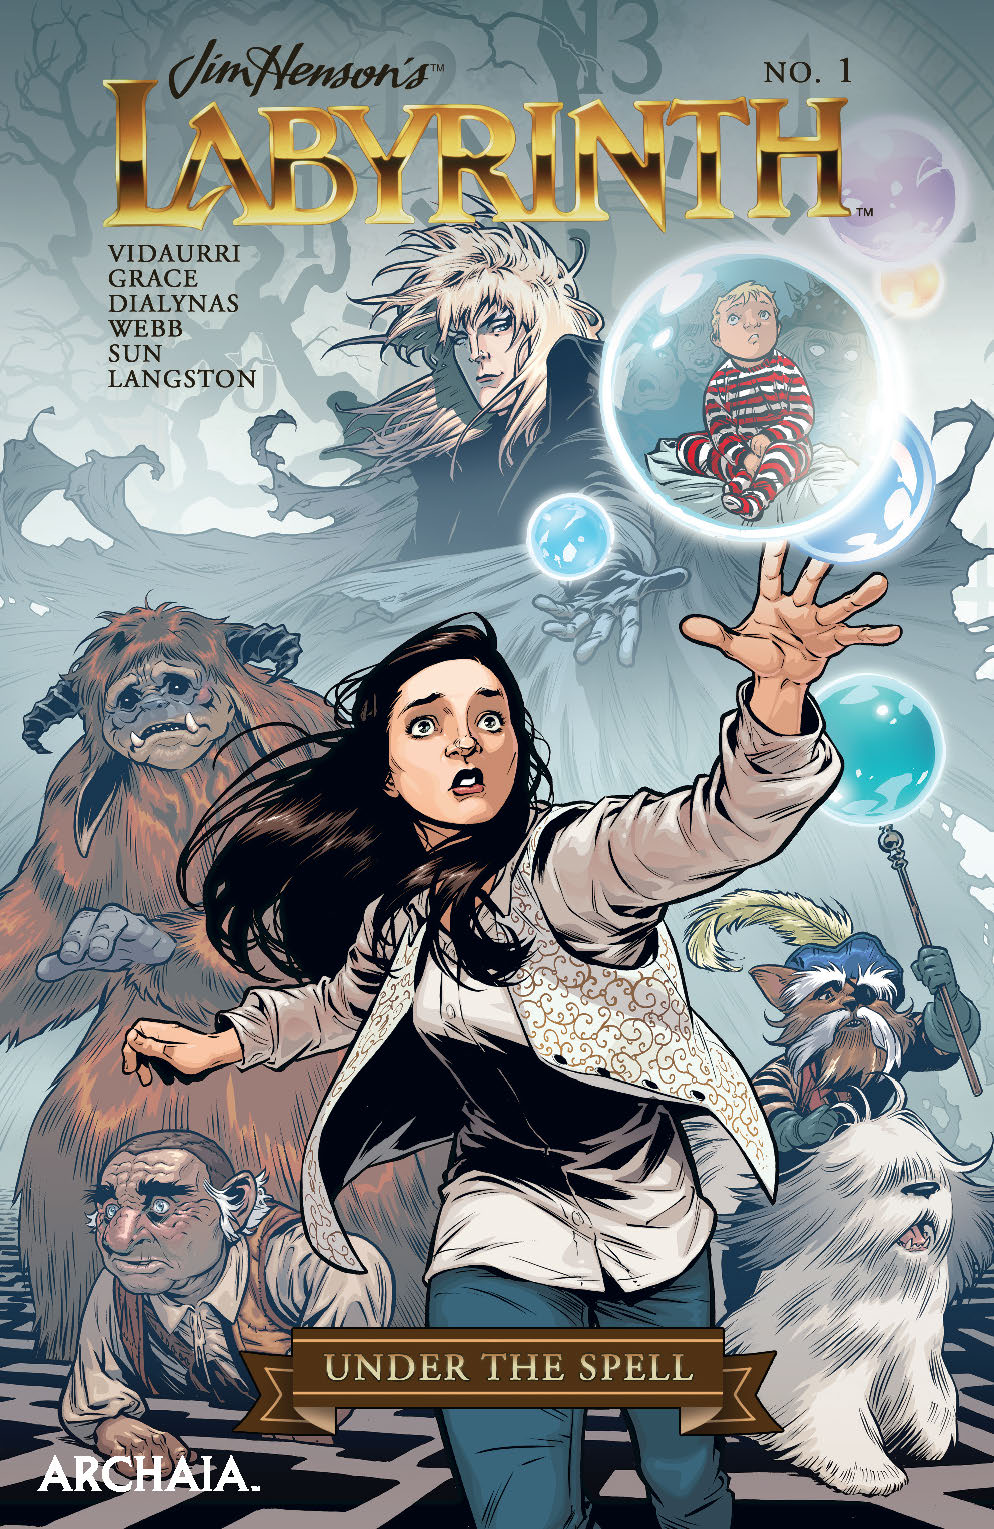 Jim Henson's Labyrinth: Under the Spell #1 Review